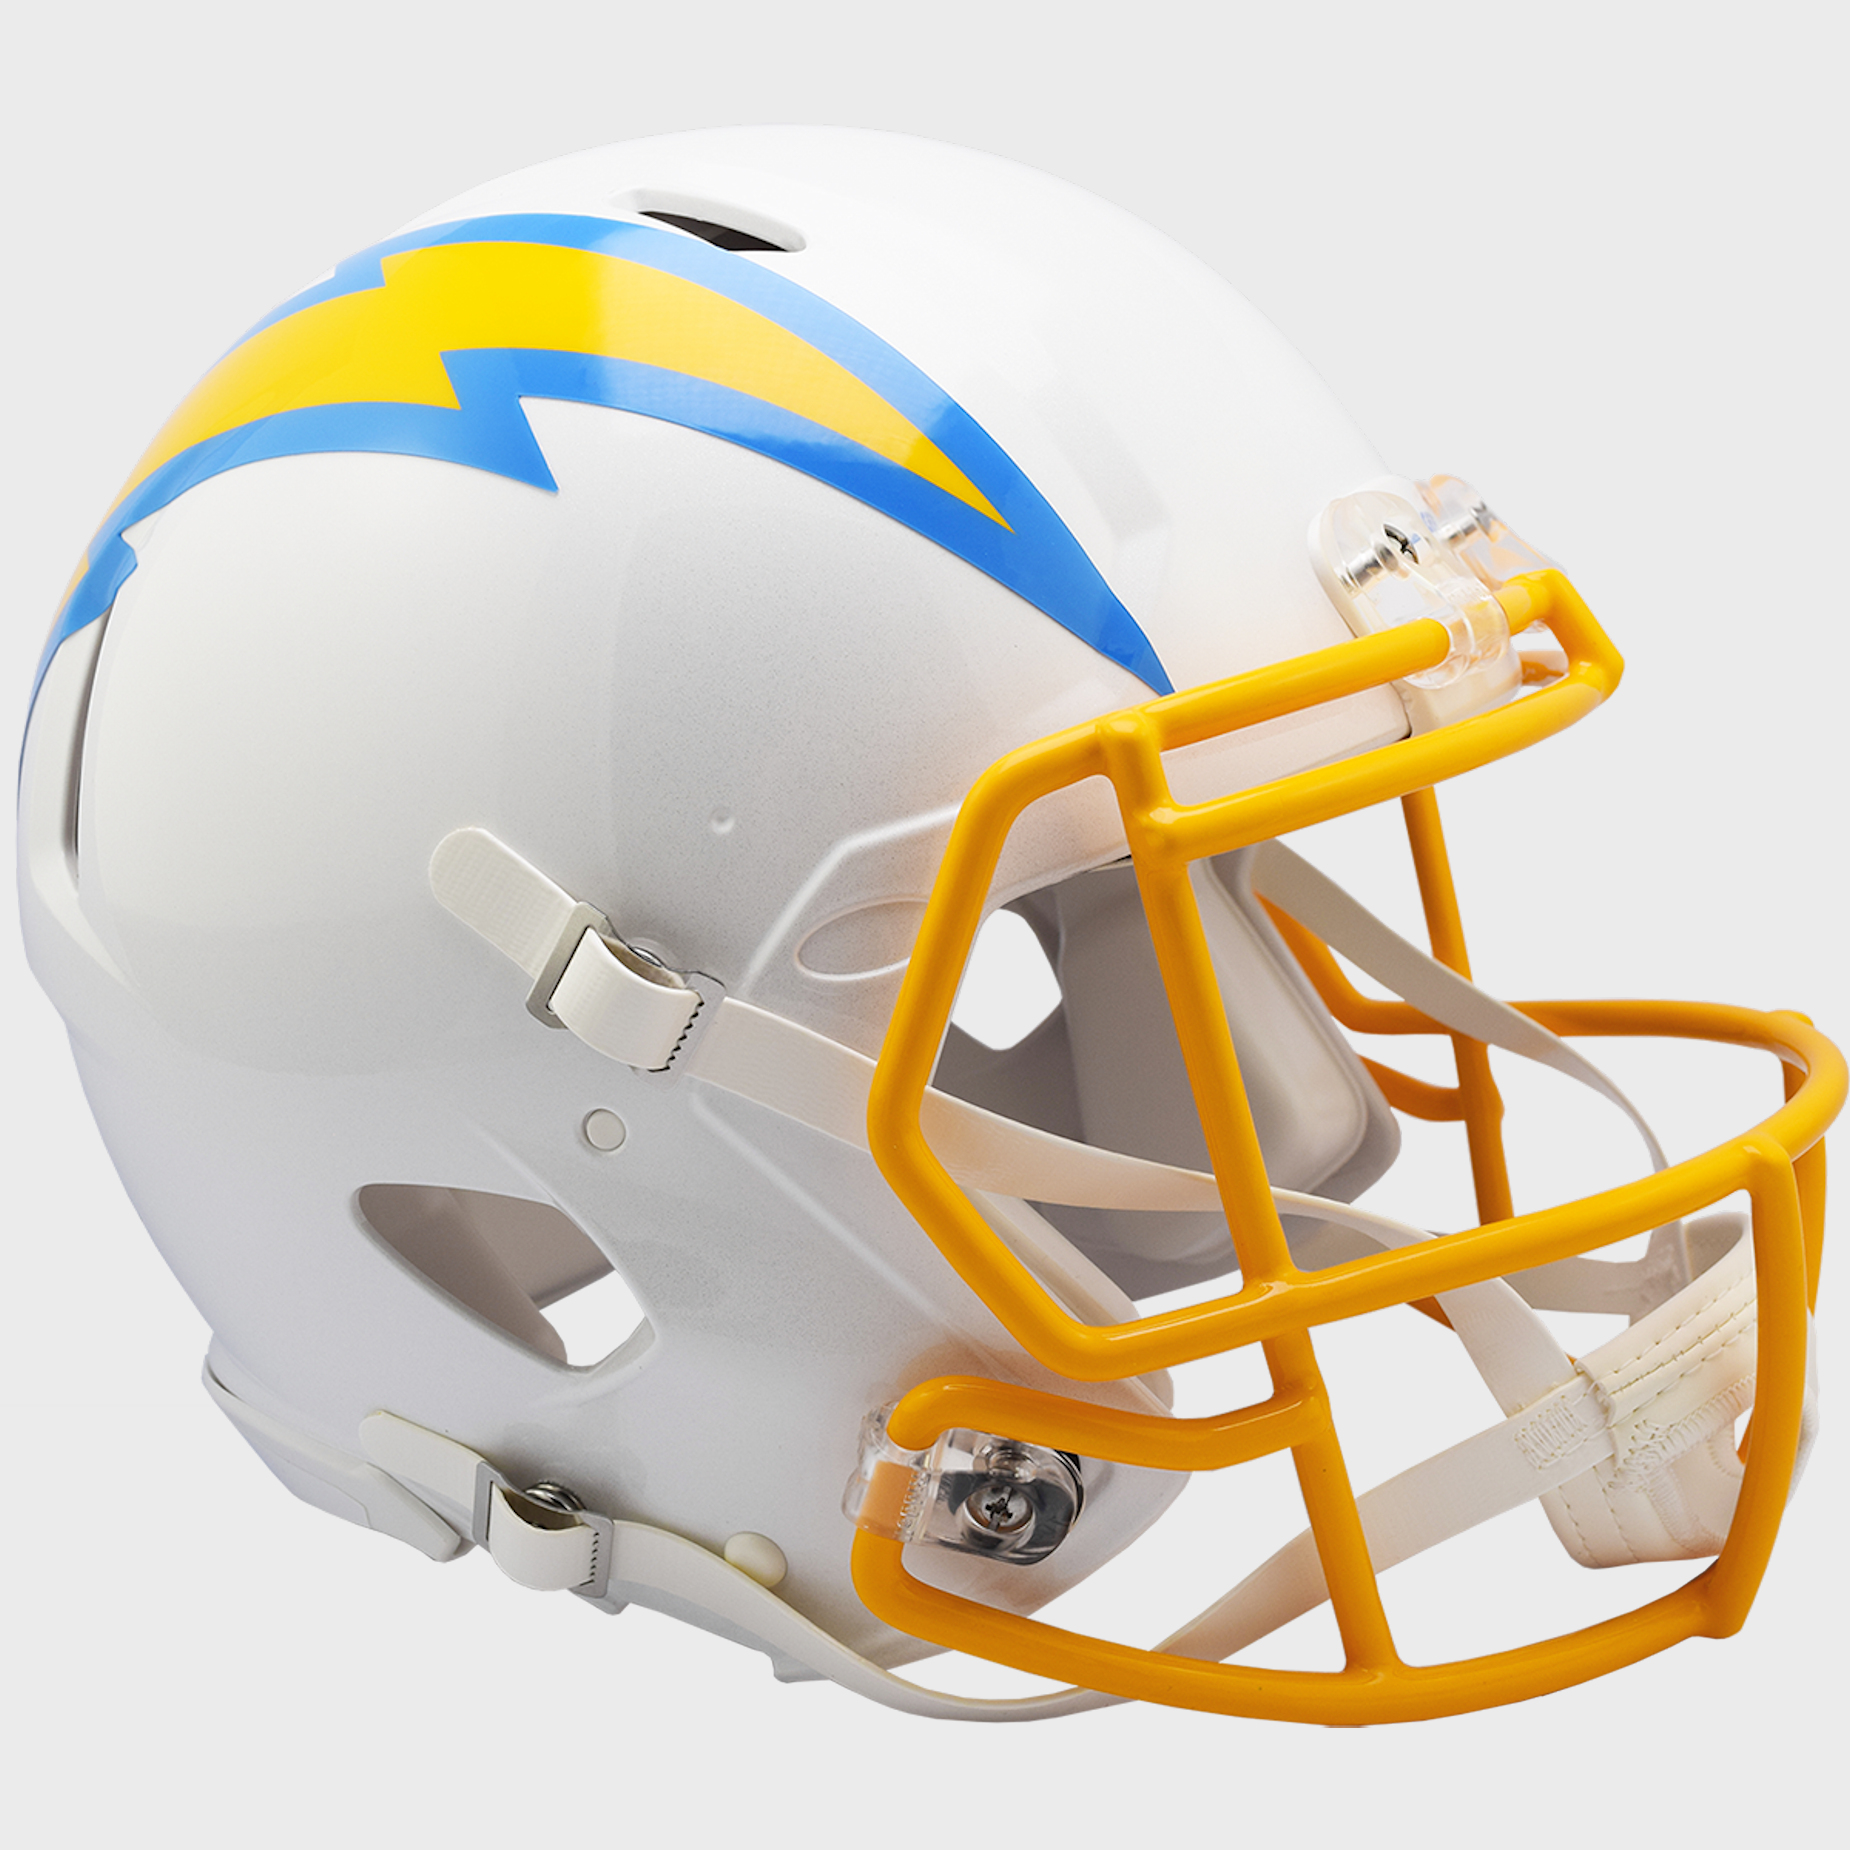 Los Angeles Chargers authentic full size helmet